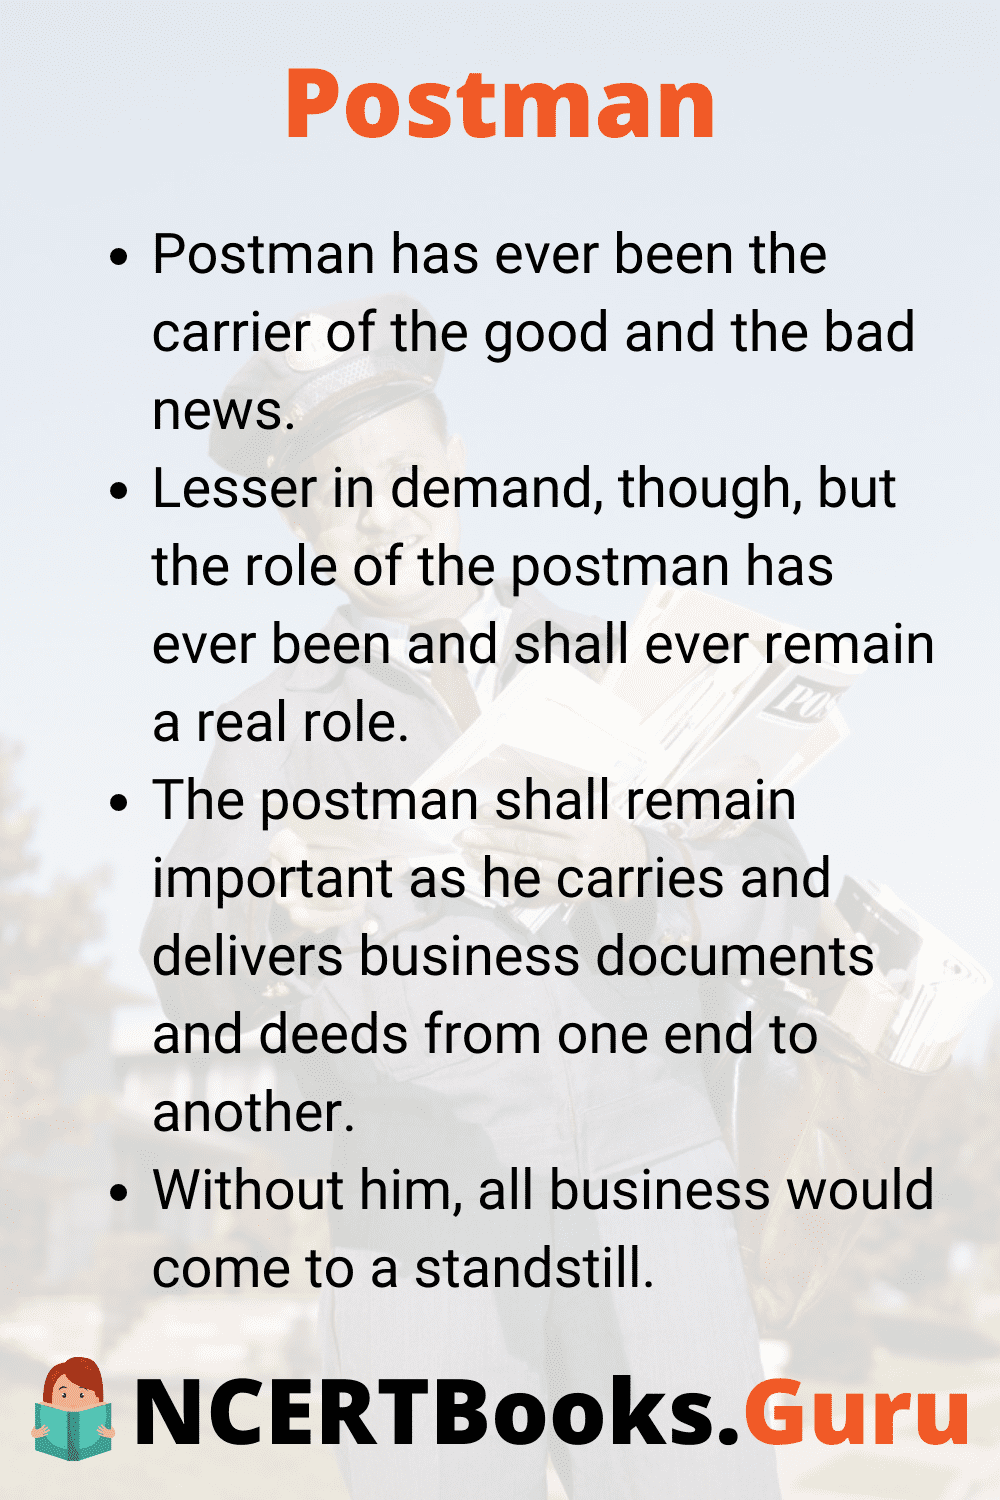 the postman essay 150 words in english